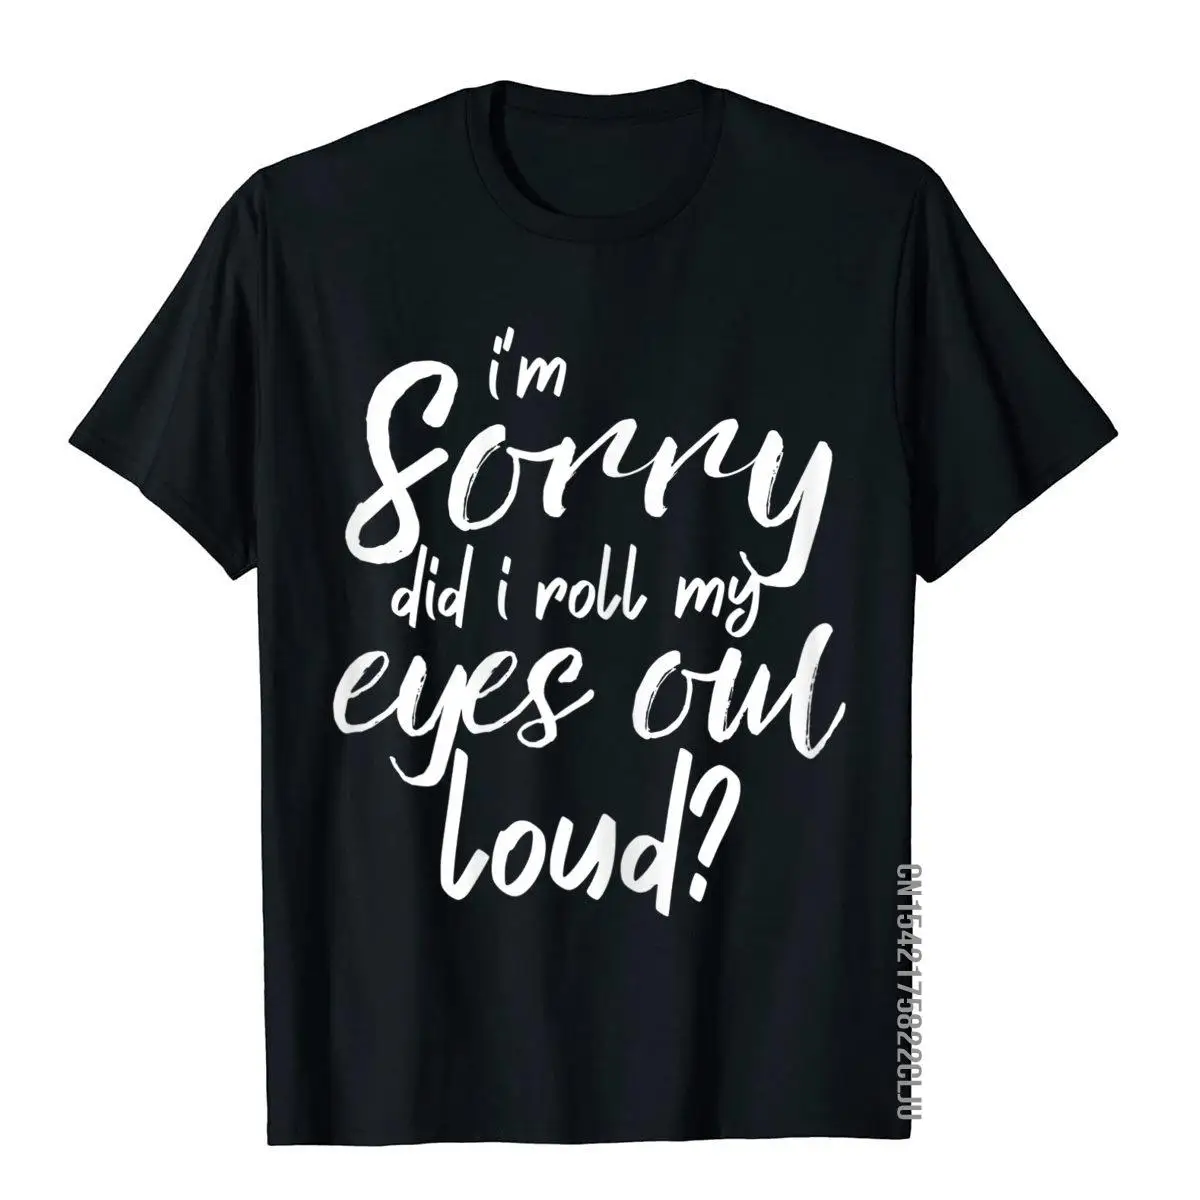 

Did I Roll My Eyes Out Loud Shirt Women Funny Birthday Gift T-Shirt Slim FitChinese Style Tops Shirts Cute Cotton T Shirts